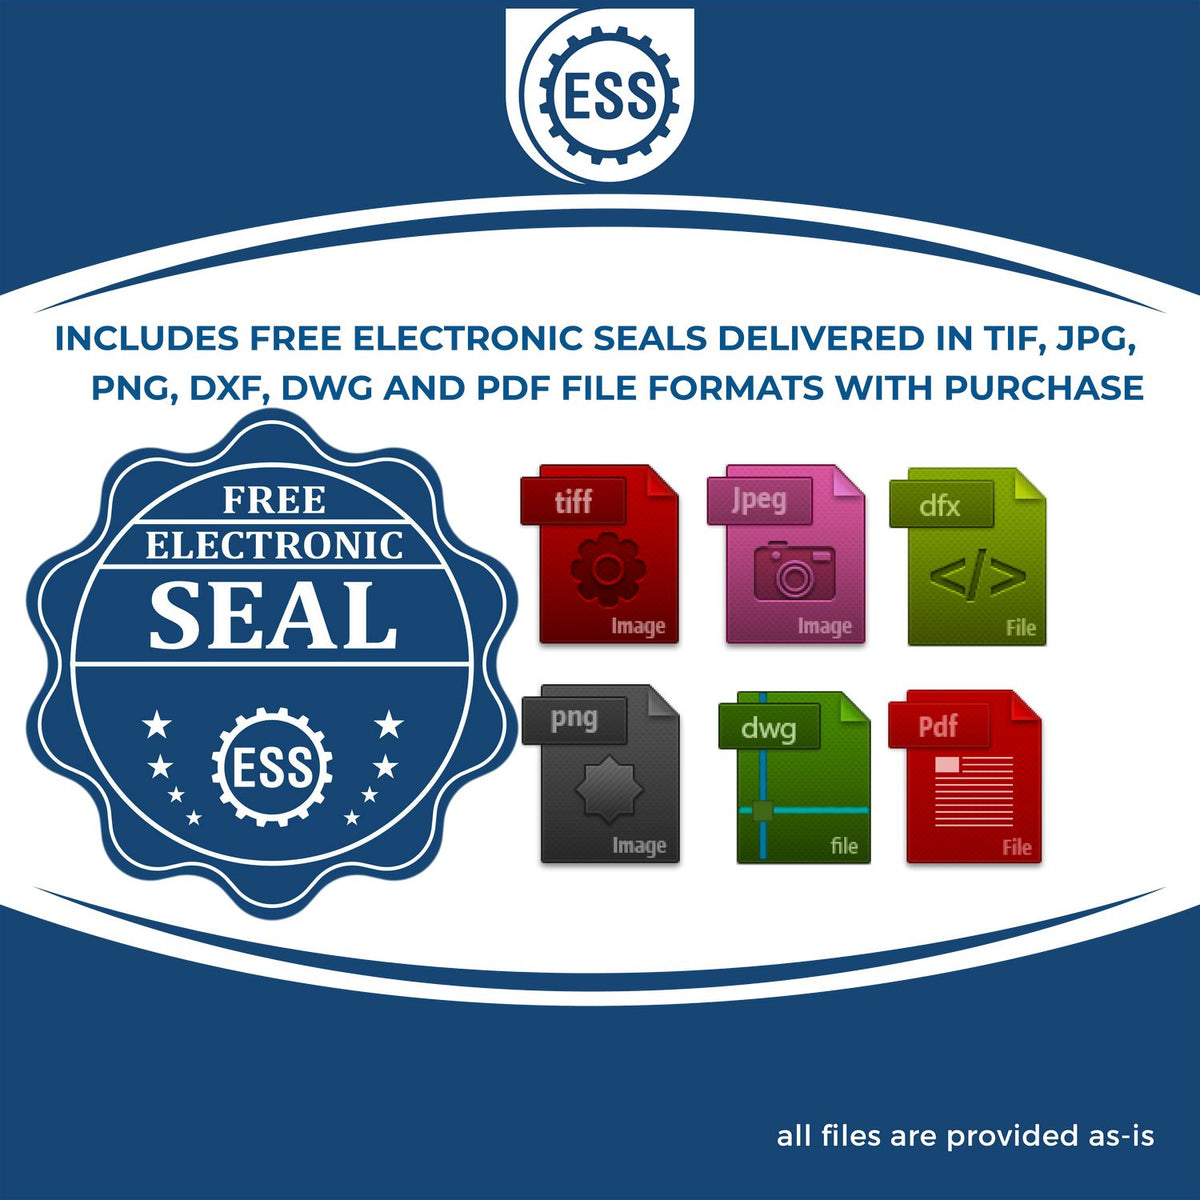 An infographic for the free electronic seal for the Soft Pocket Rhode Island Landscape Architect Embosser illustrating the different file type icons such as DXF, DWG, TIF, JPG and PNG.